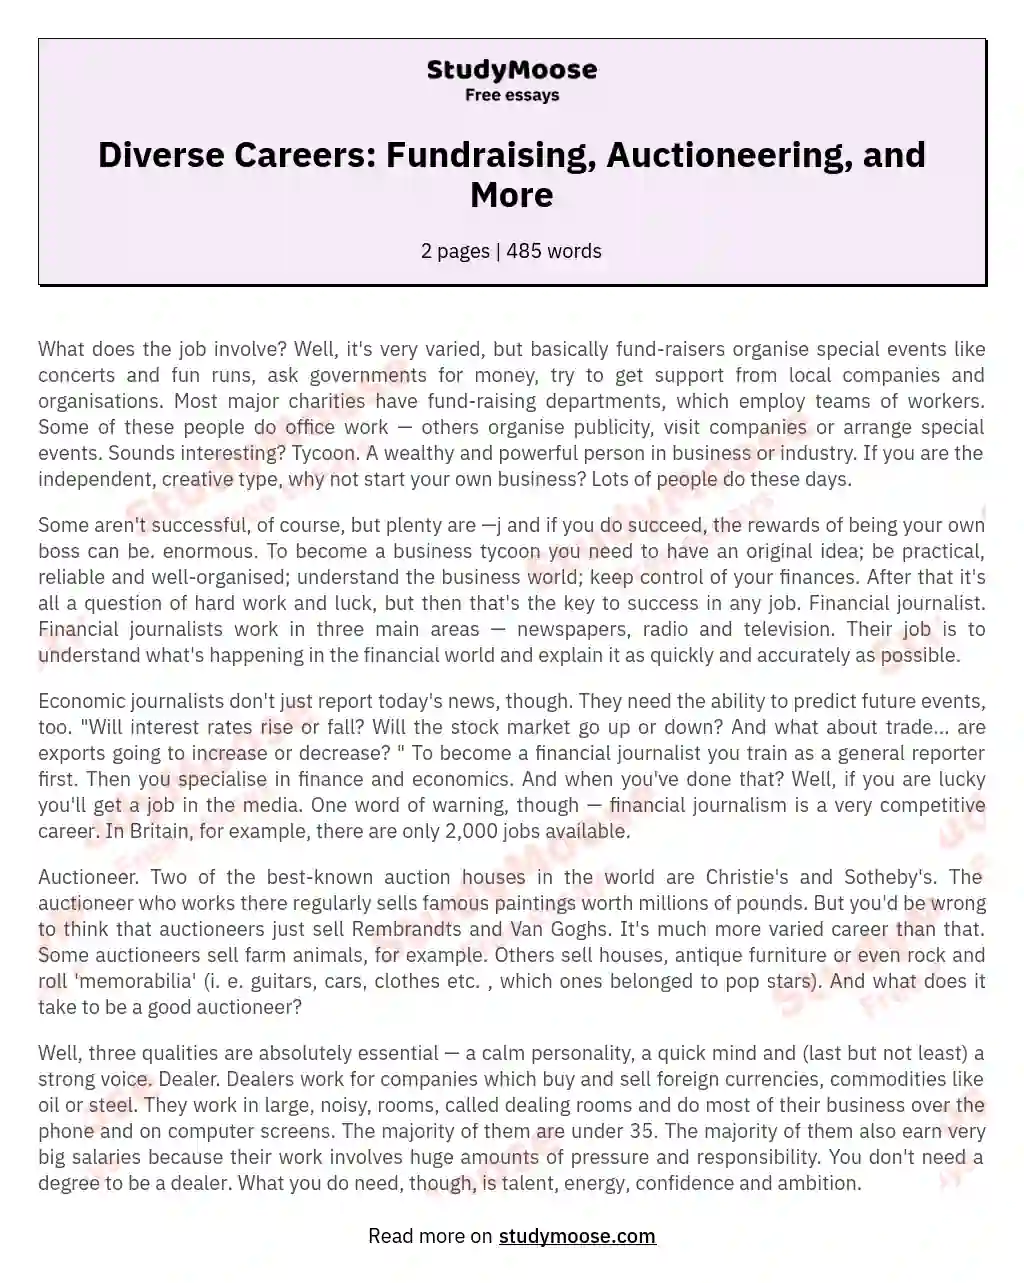 Diverse Careers: Fundraising, Auctioneering, and More essay